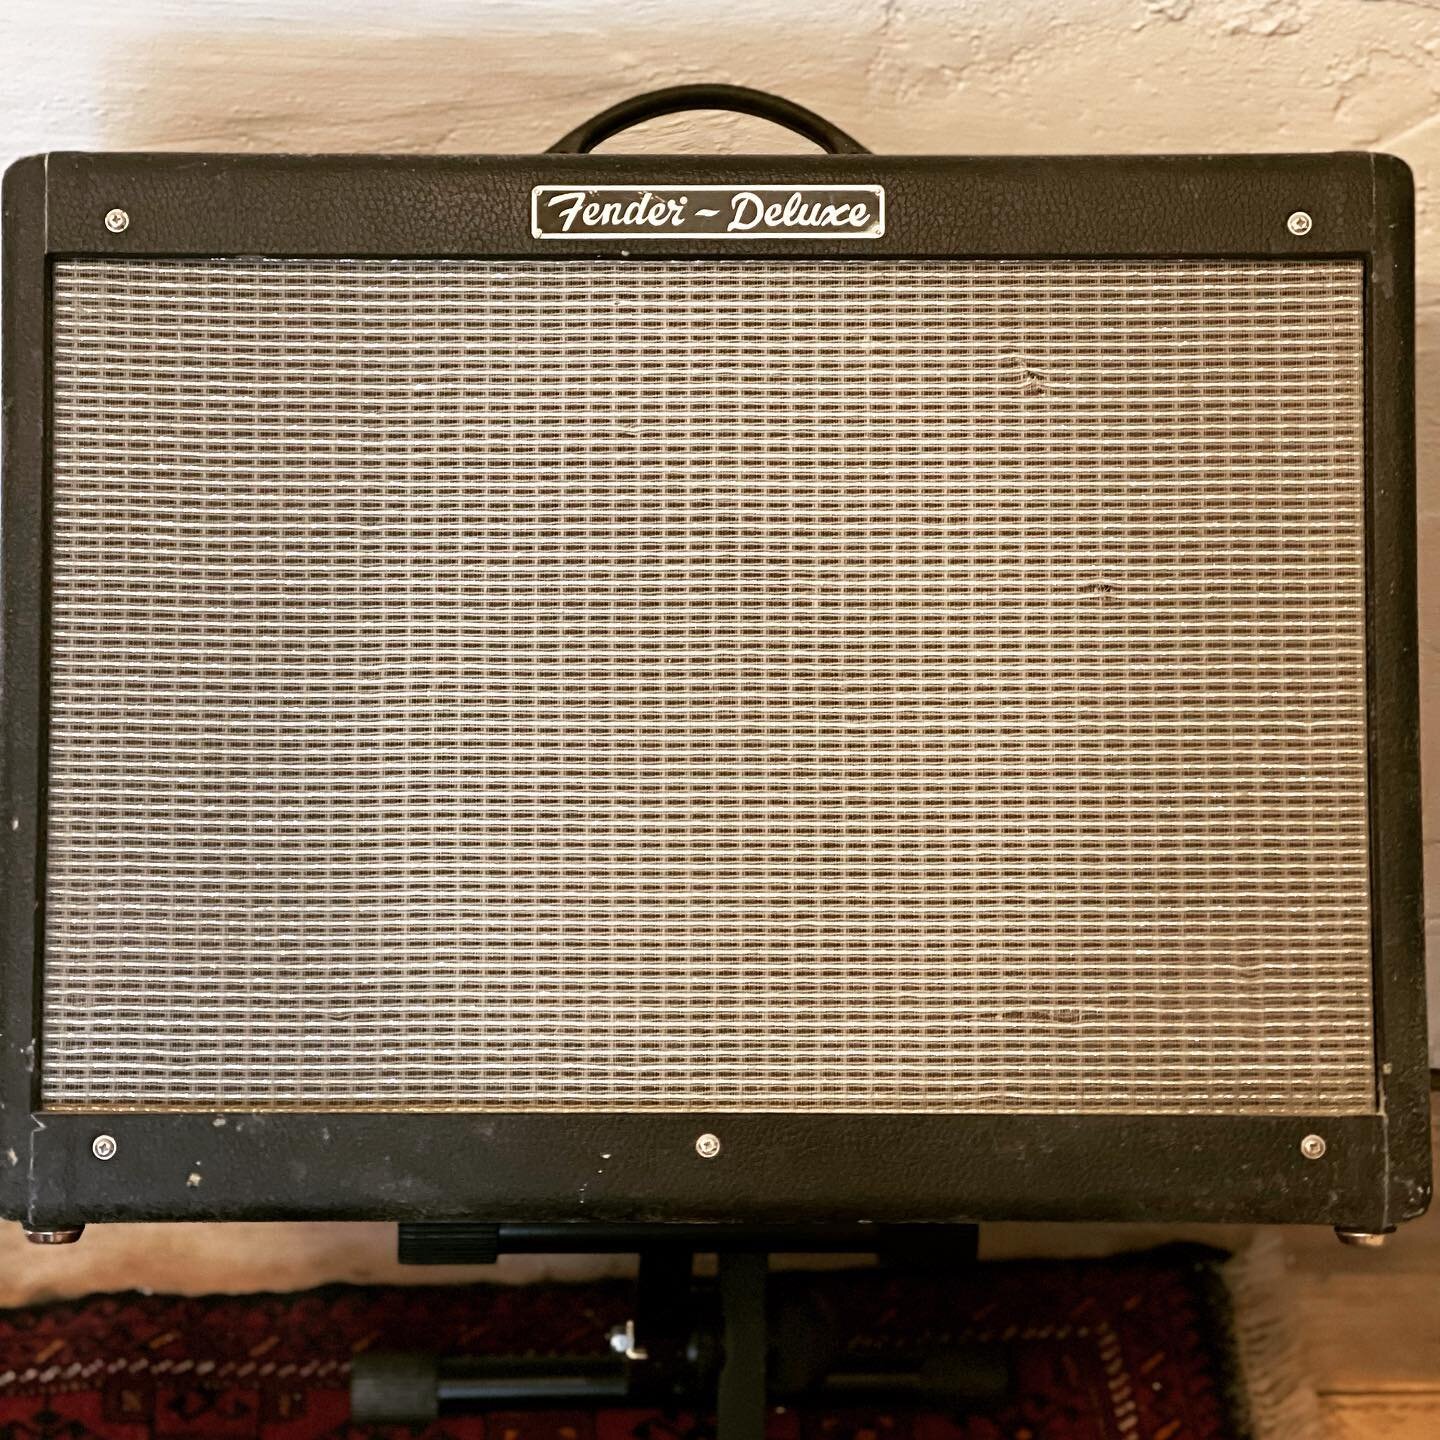 A truly brilliant amp for that classic angular gtr sound.